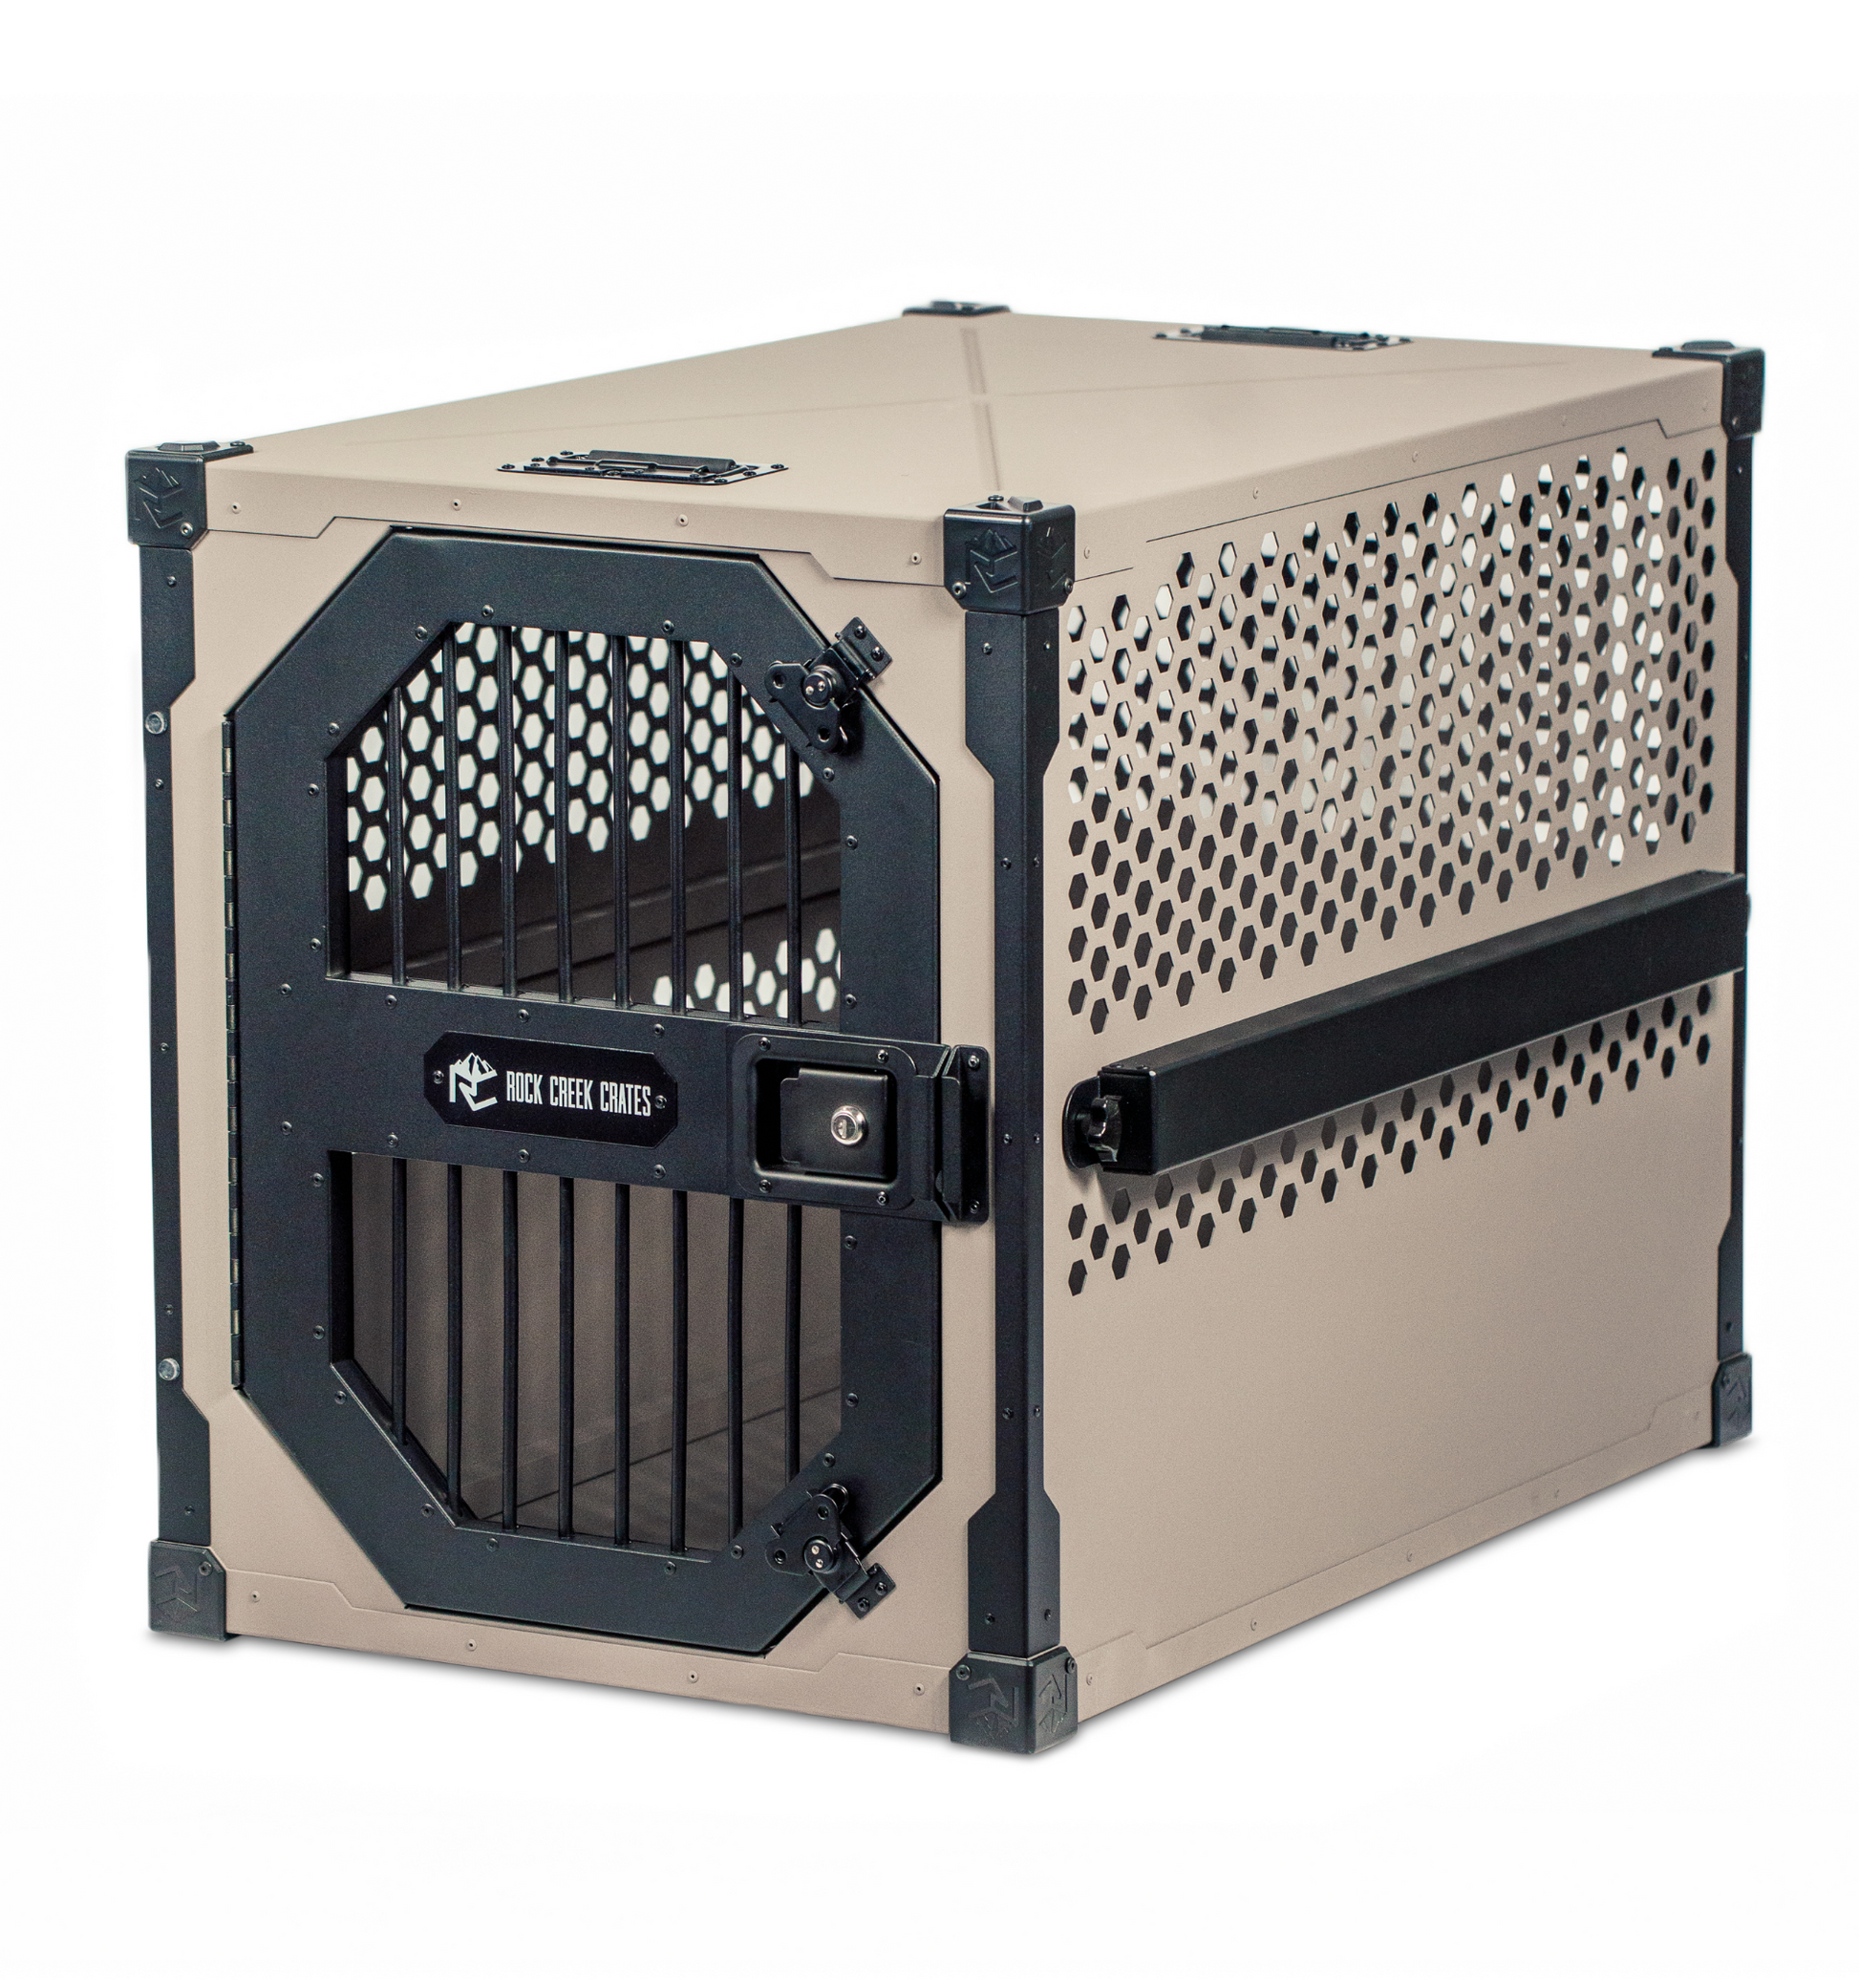 Stationary dog crate by Rock Creek Crates